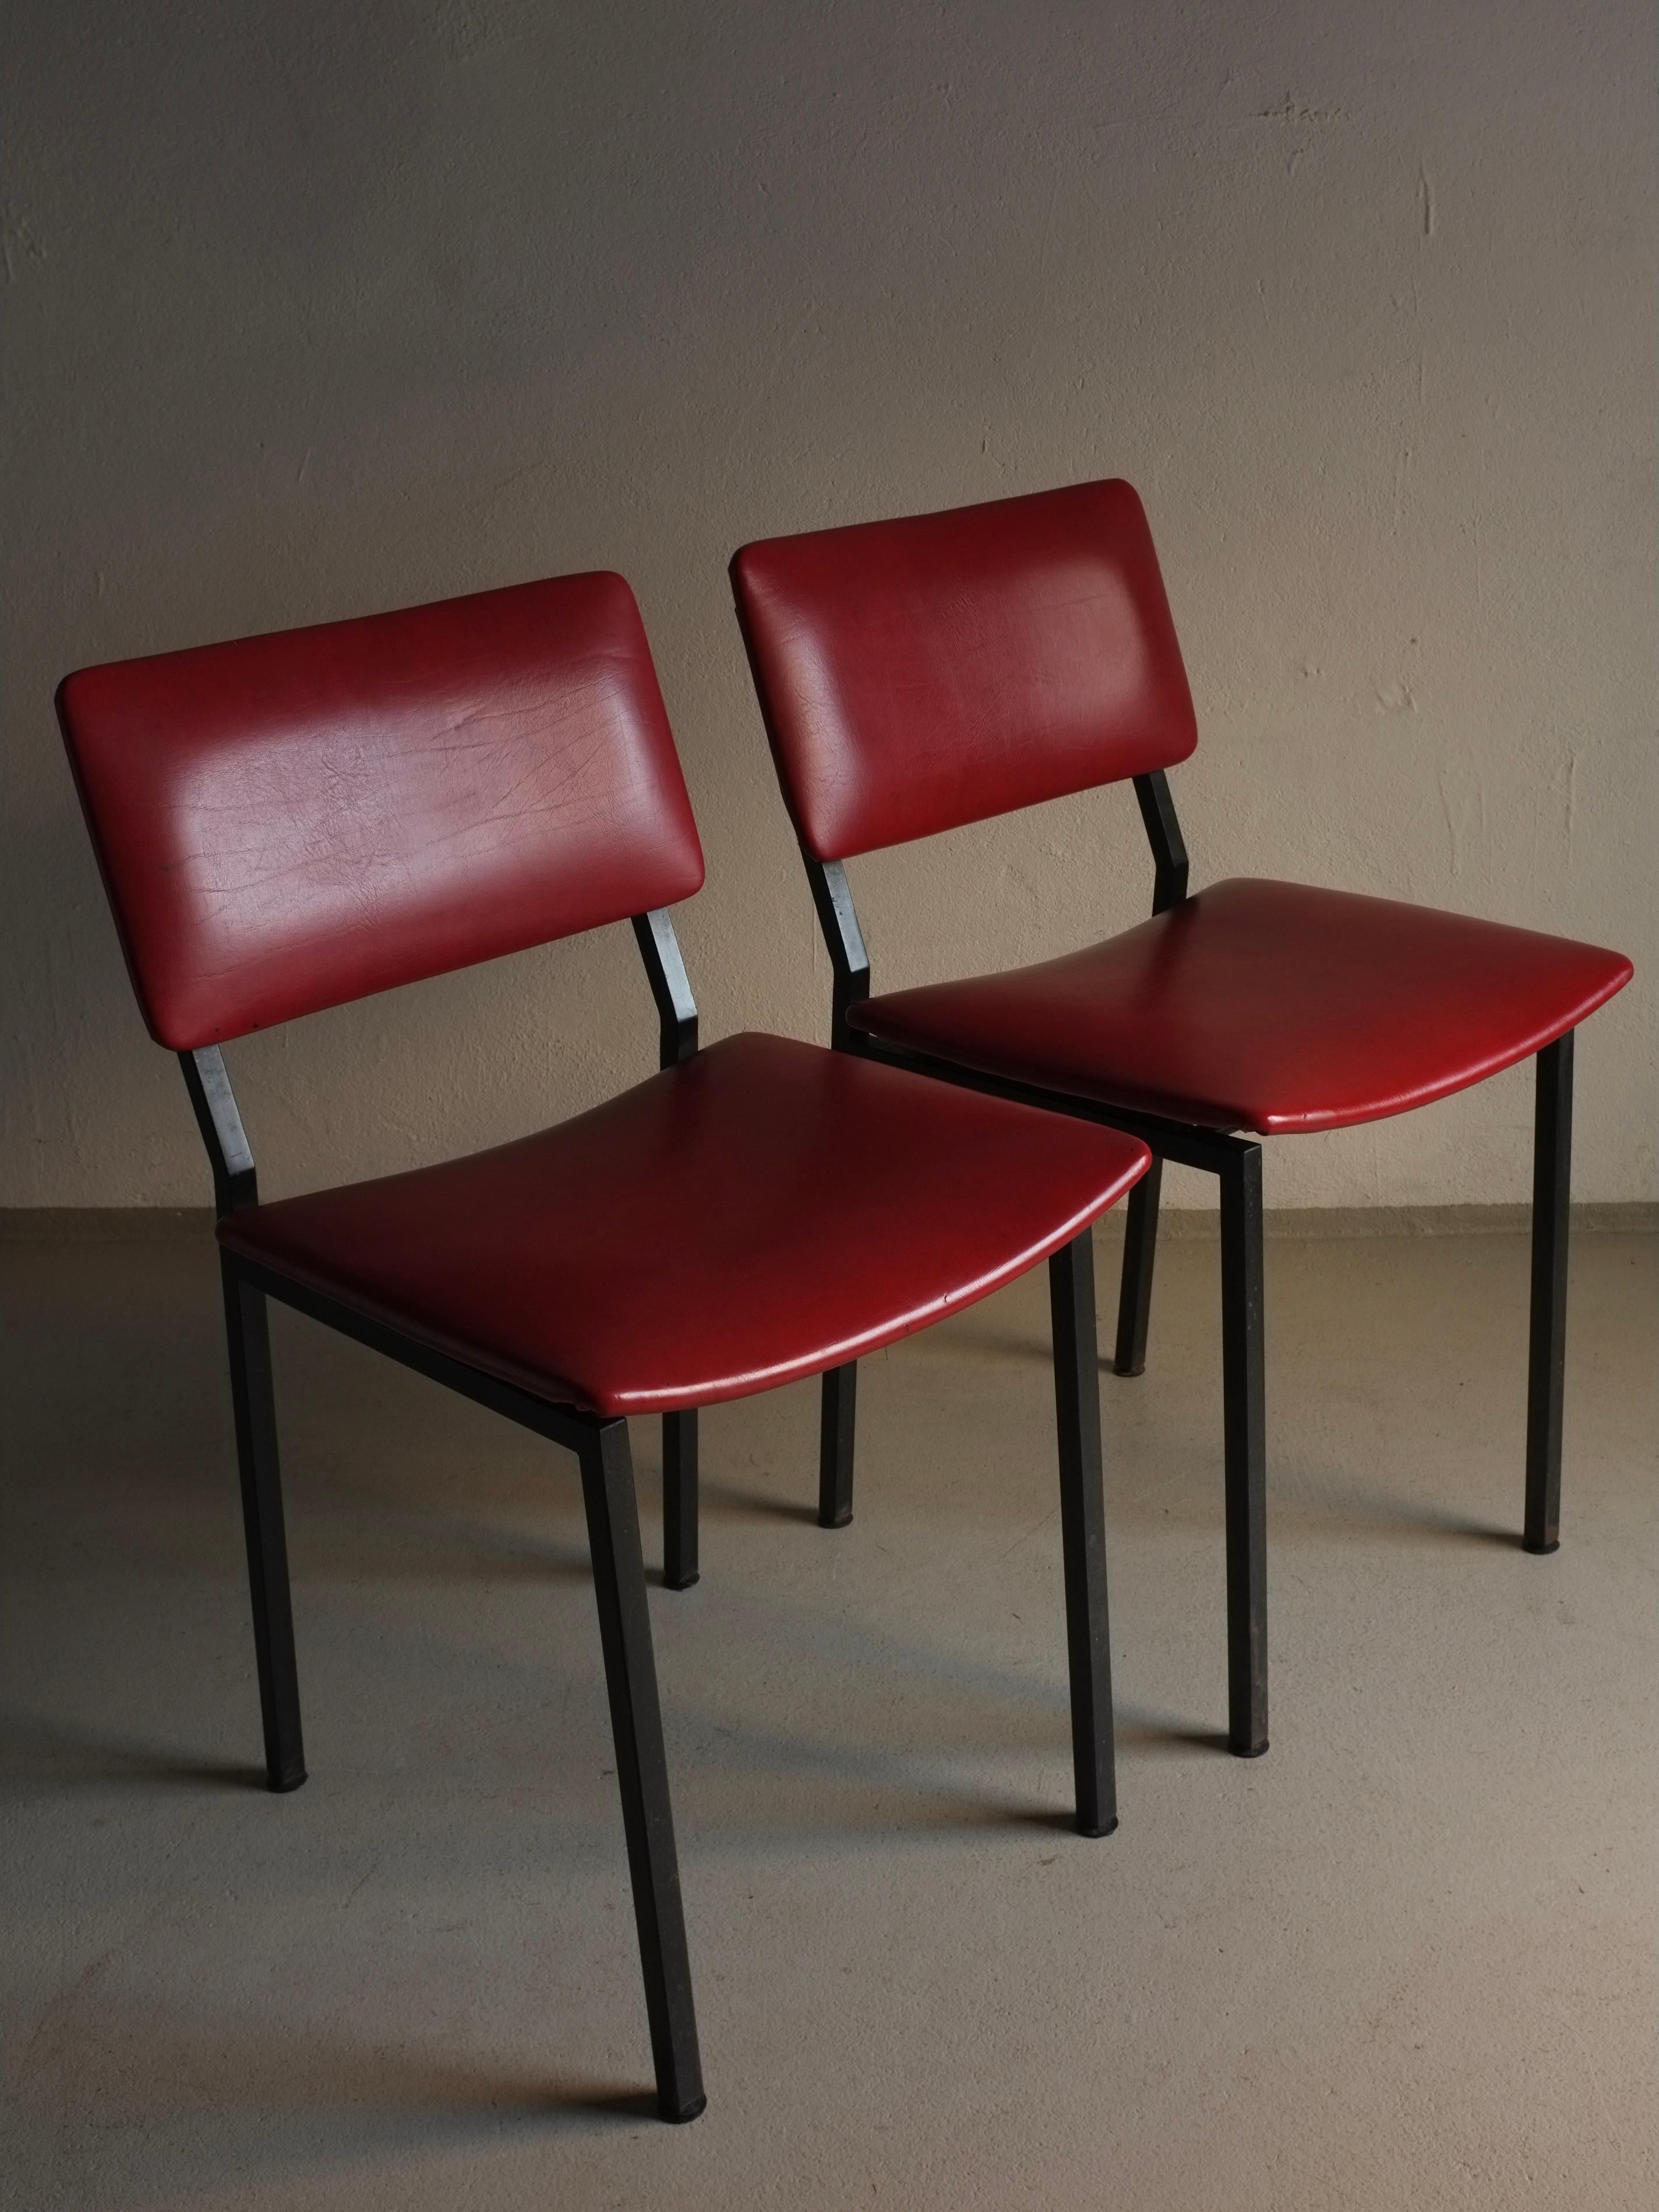 20th Century Set of 2 Black Metal Chairs by Gerrit Veenendaal For Kembo, Netherlands 1960s For Sale